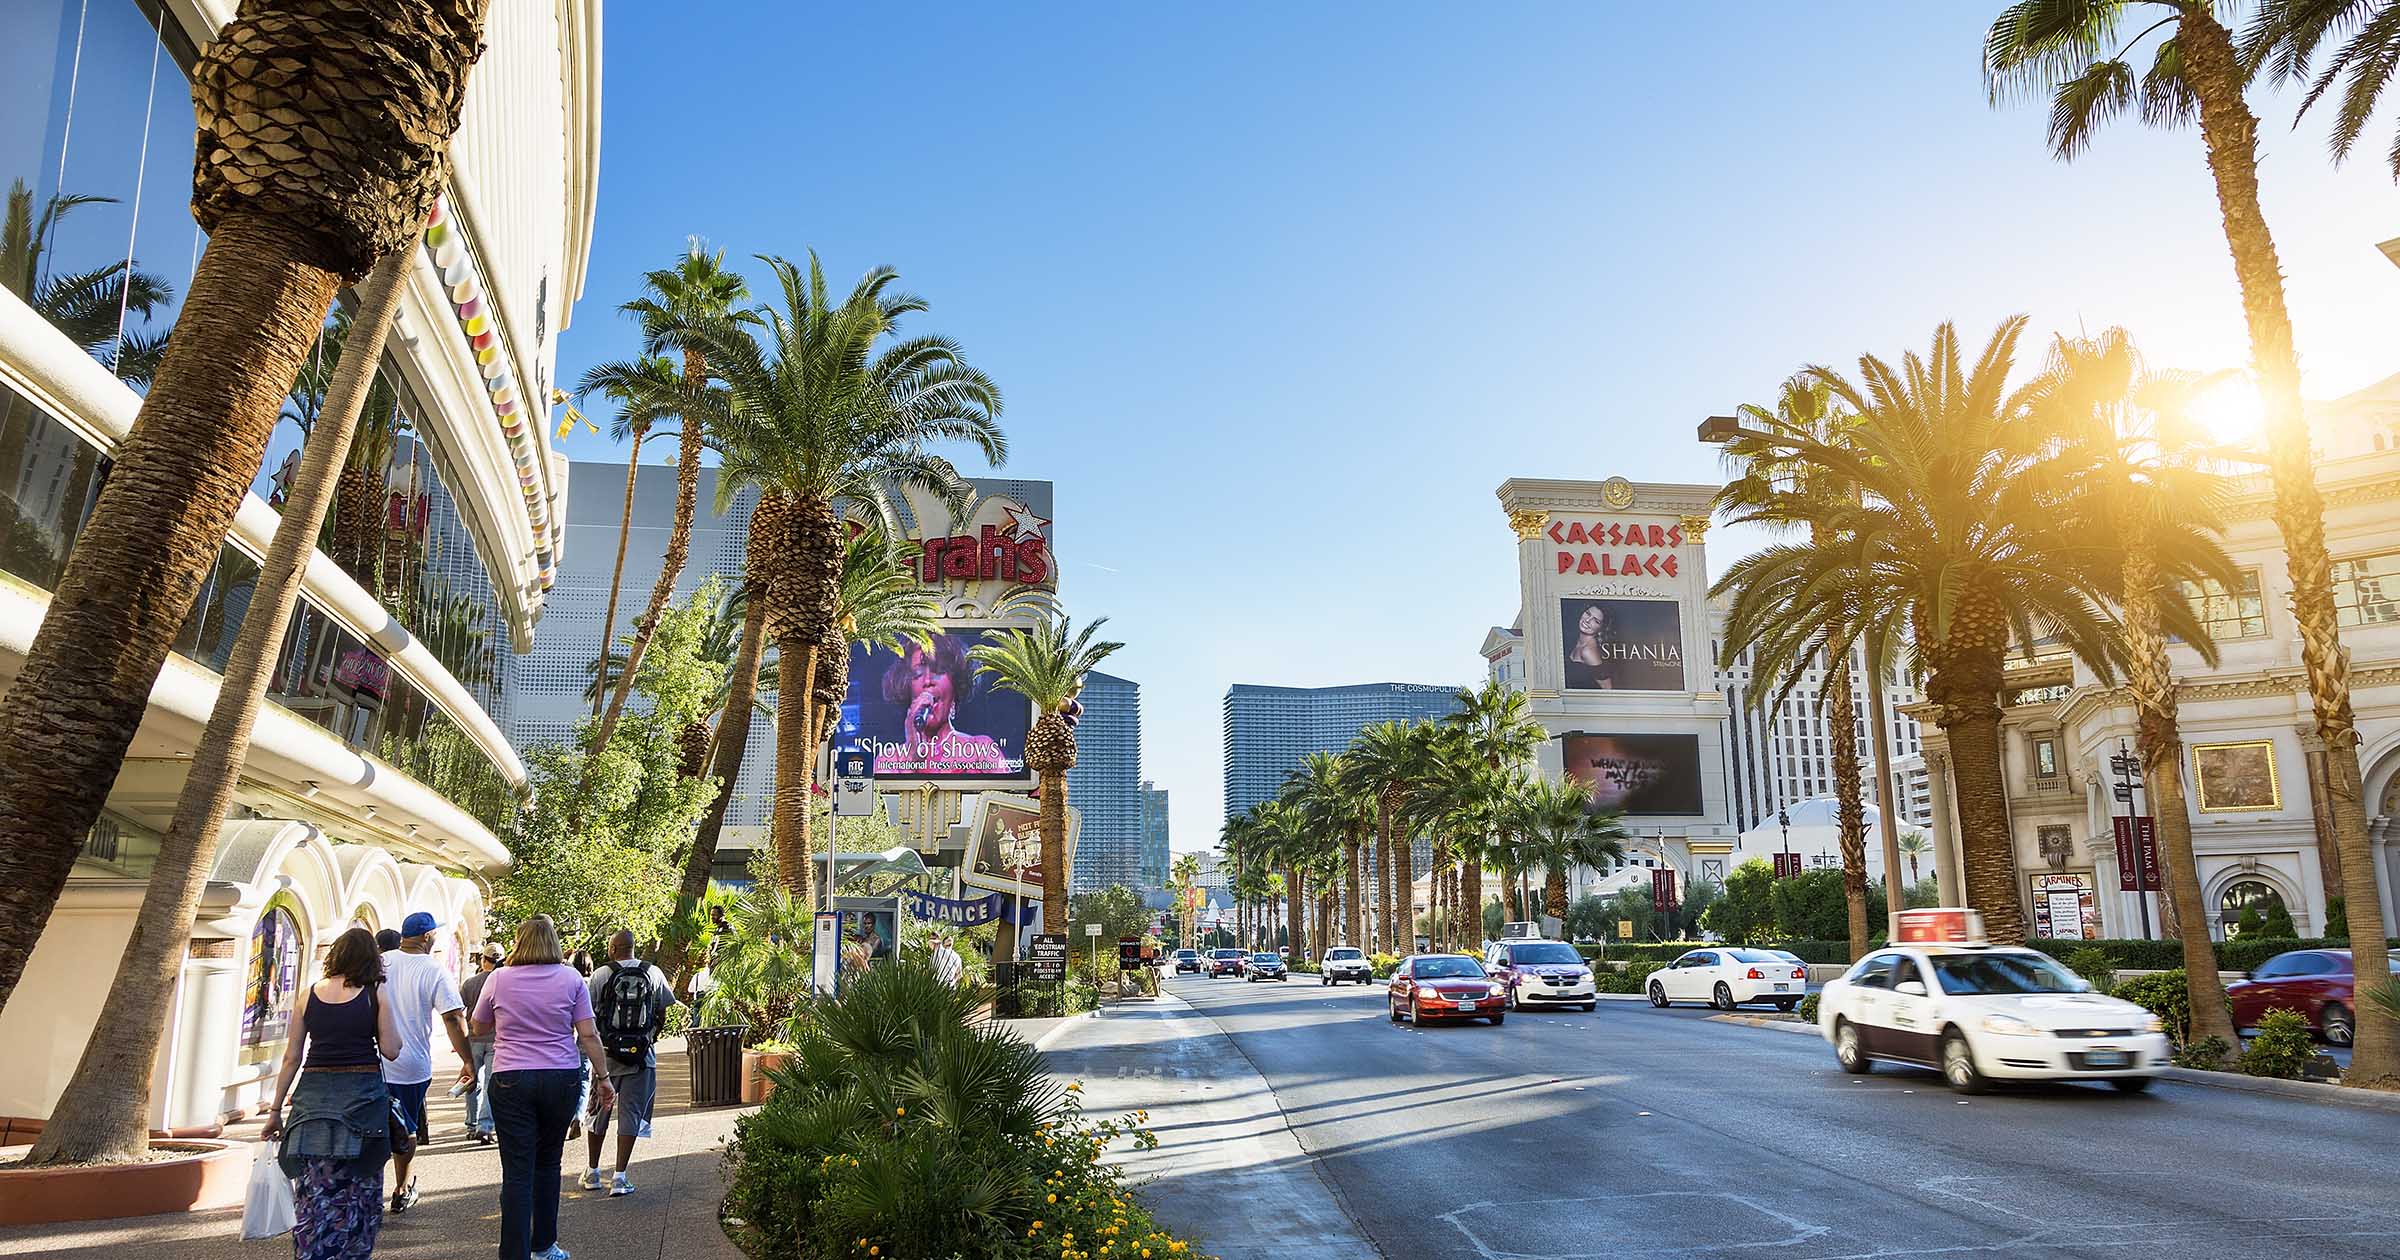 The Best Time to Visit Las Vegas